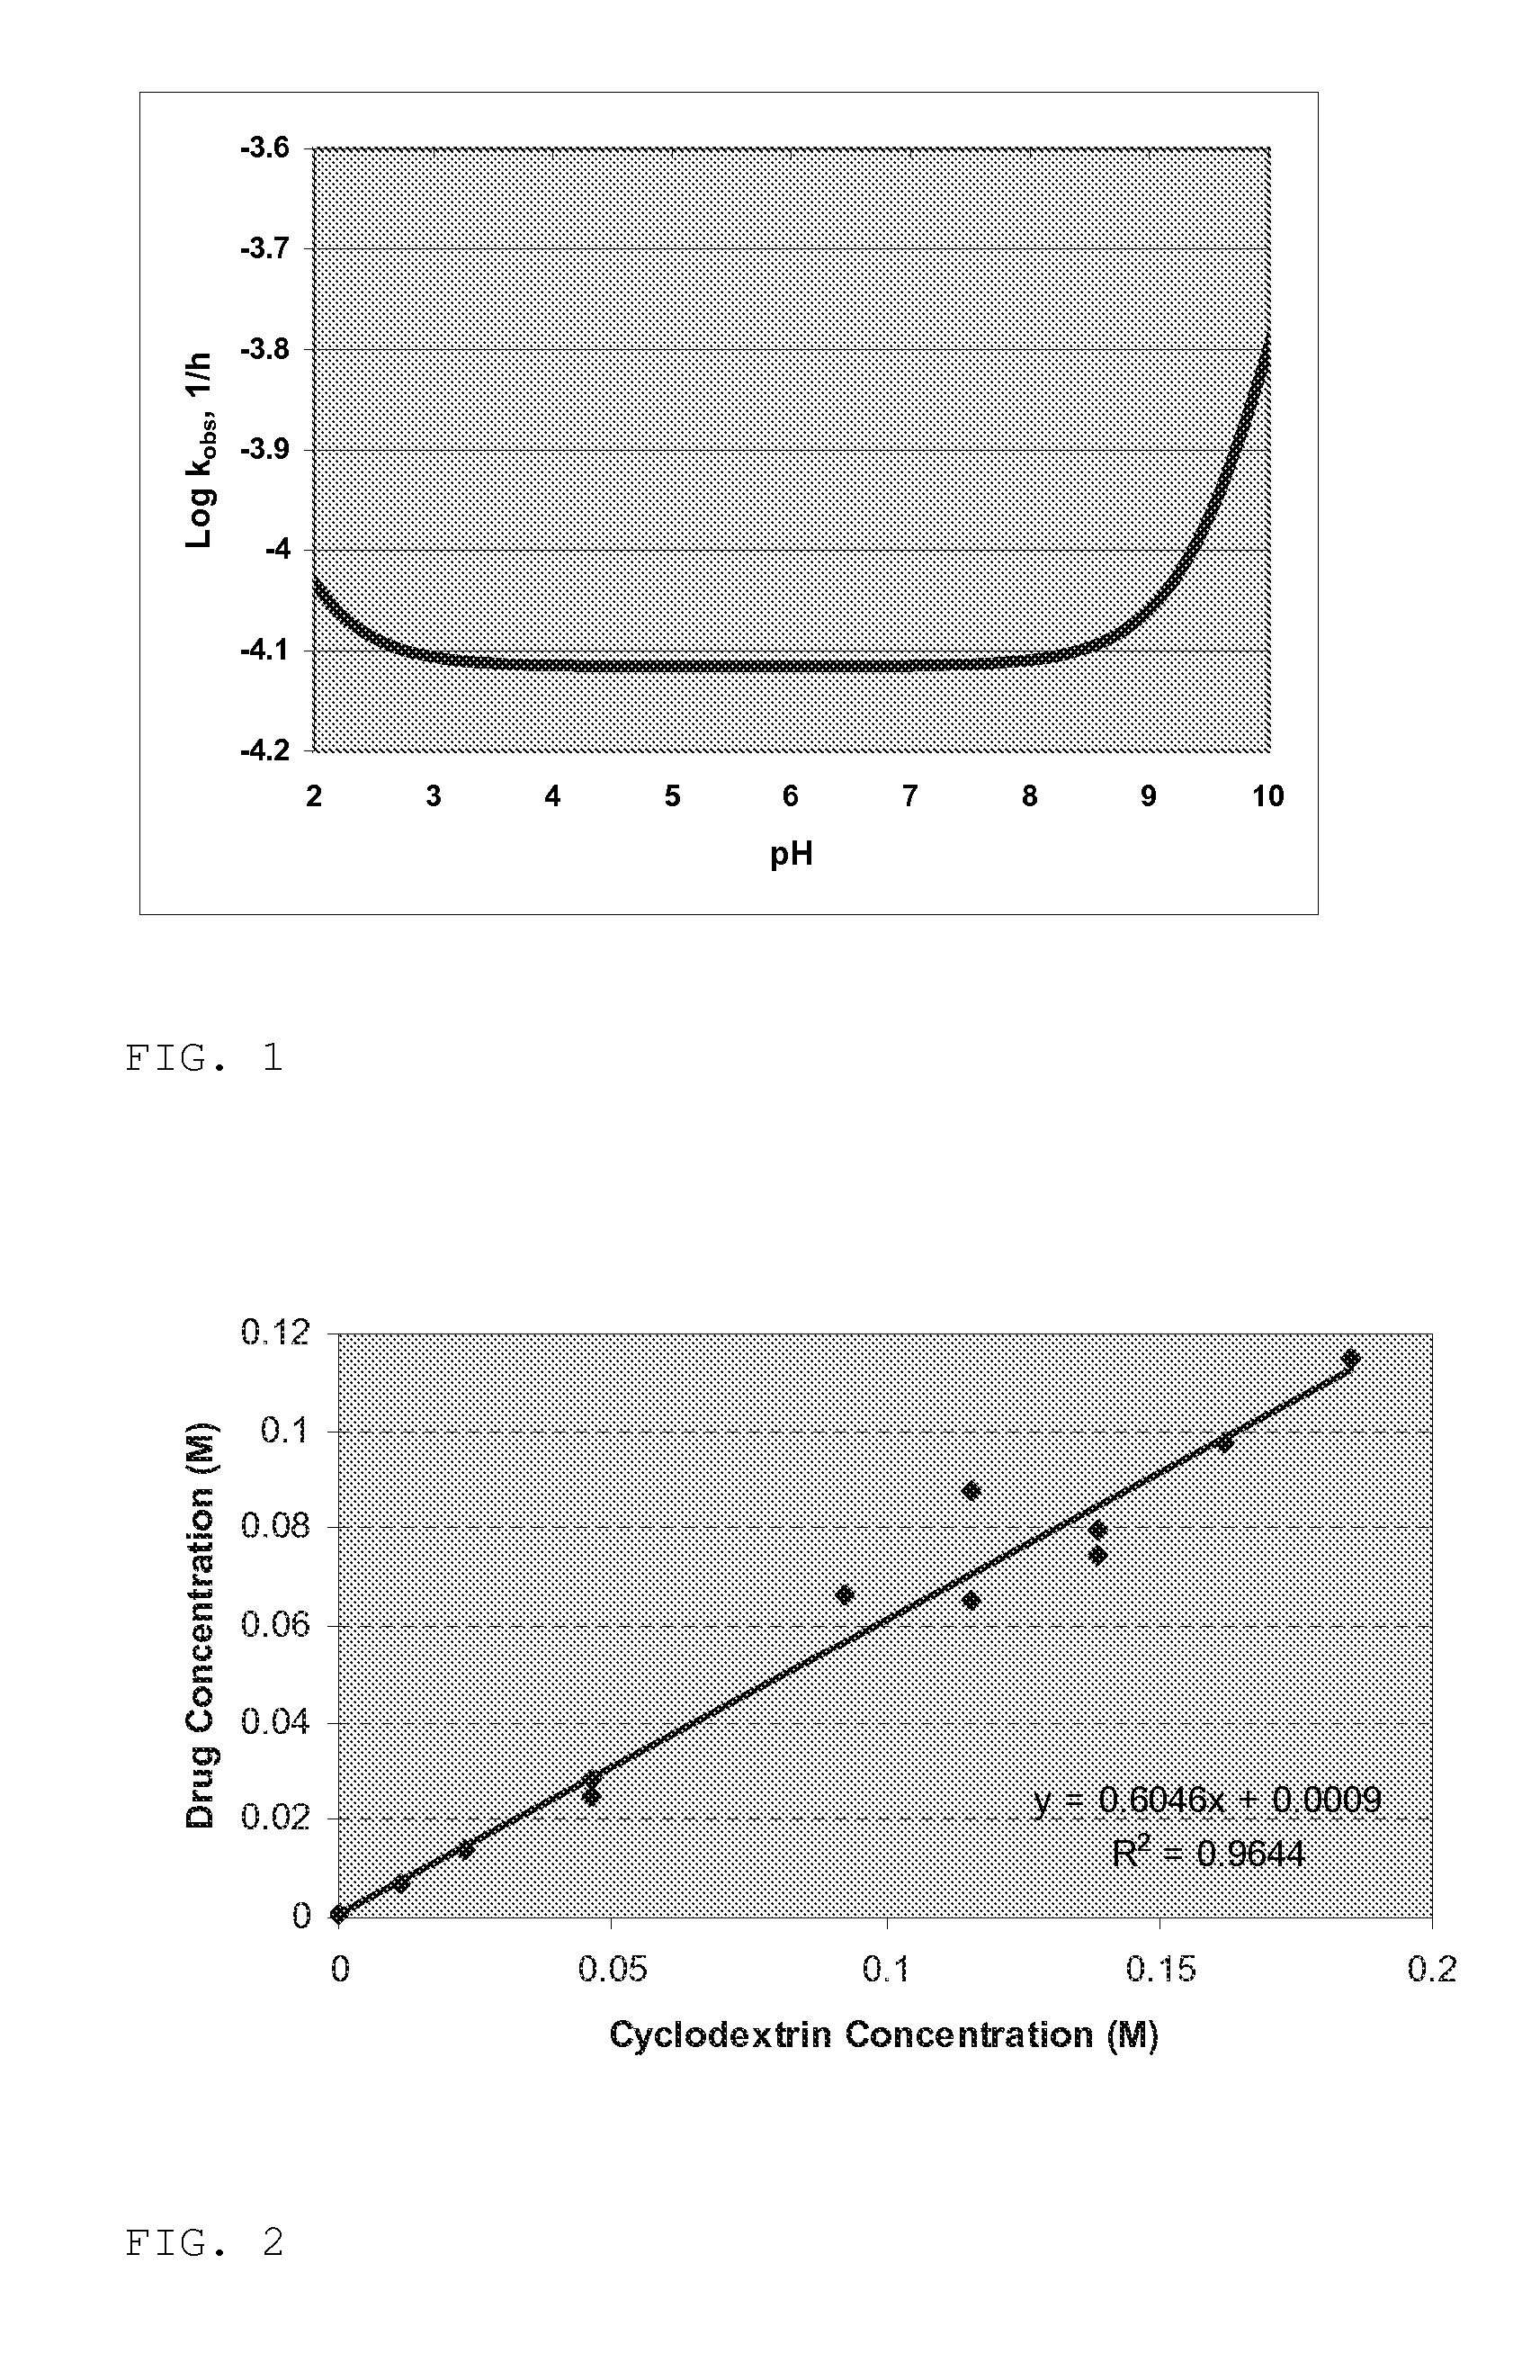 Compositions comprising lipoxygenase inhibitors and cyclodextrin